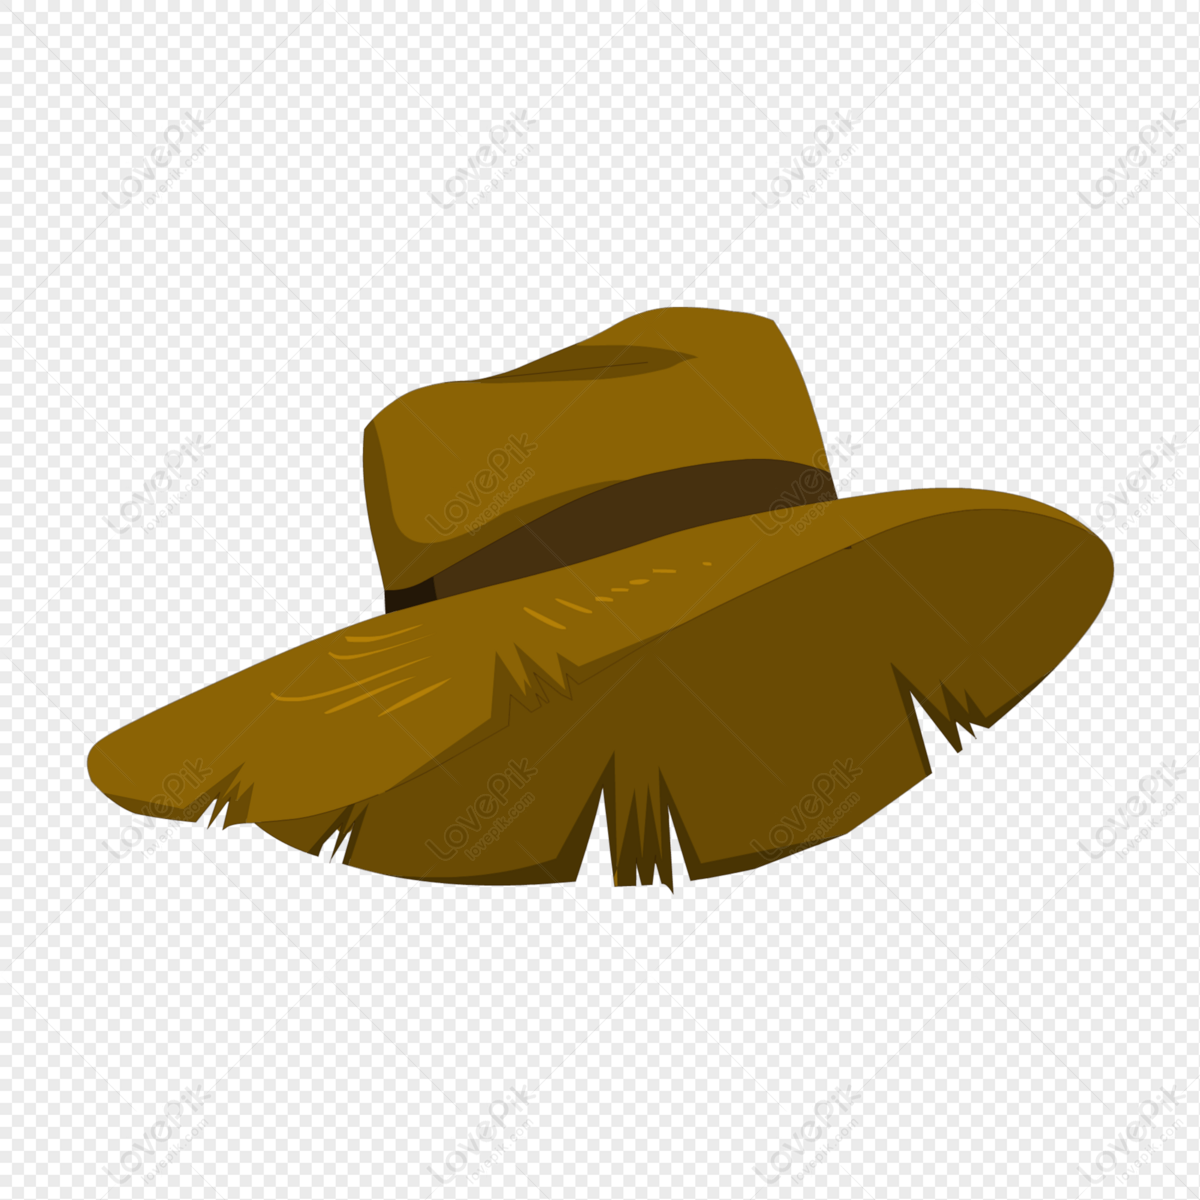 Hat PNG Transparent Image And Clipart Image For Free Download - Lovepik ...